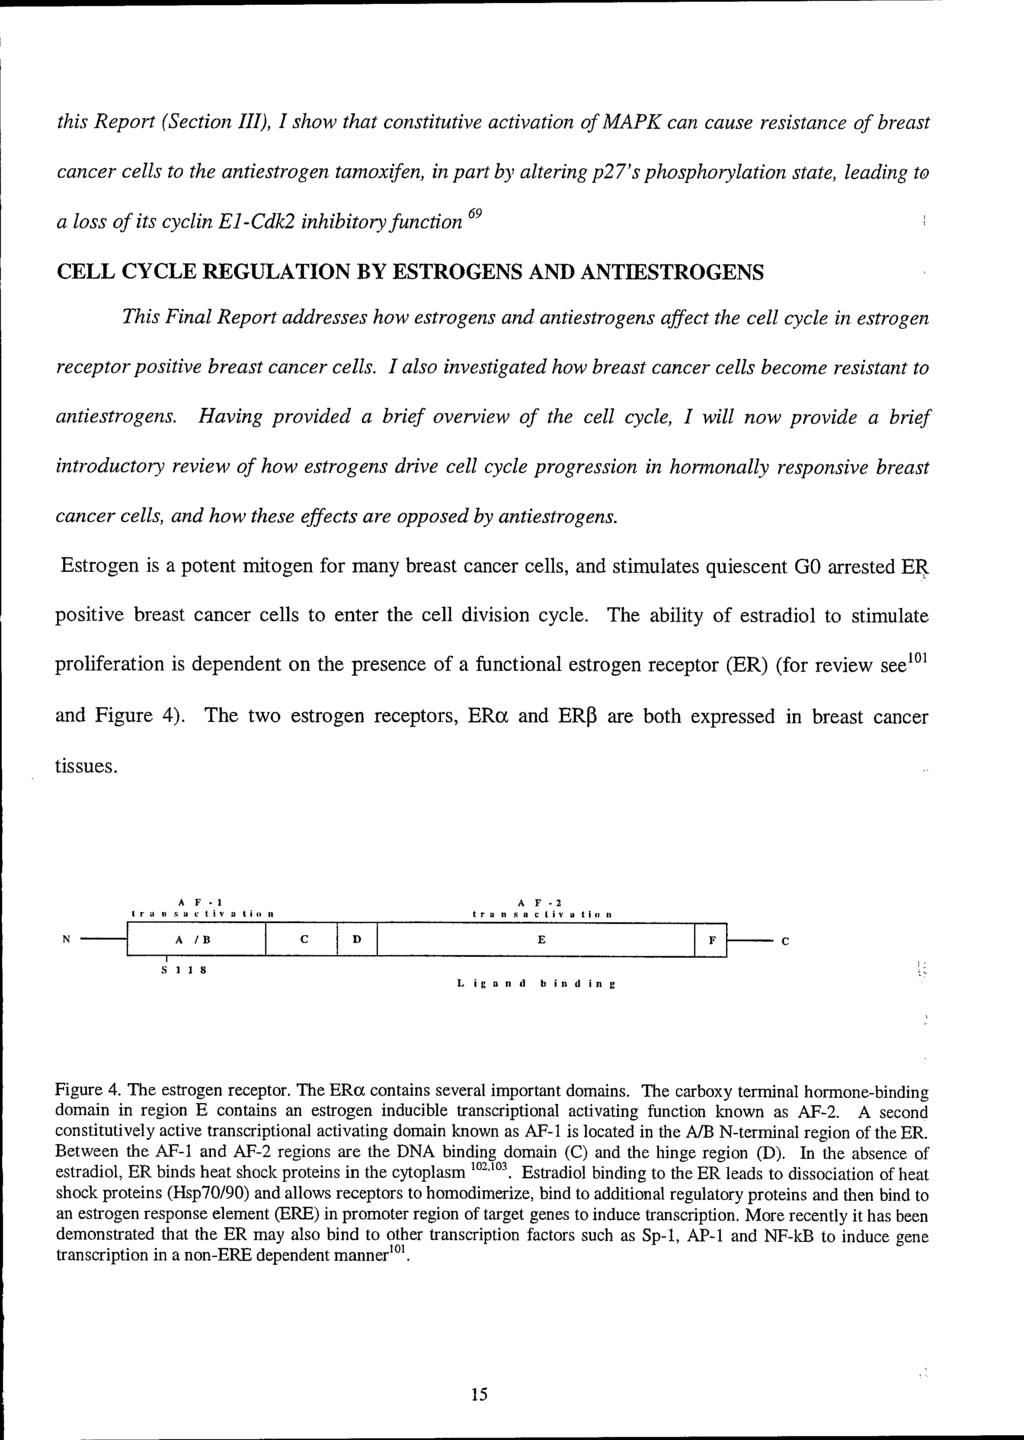 this Report (Section III), I show that constitutive activation ofmapk can cause resistance of breast cancer cells to the antiestrogen tamoxifen, in part by altering p27's phosphorylation state,